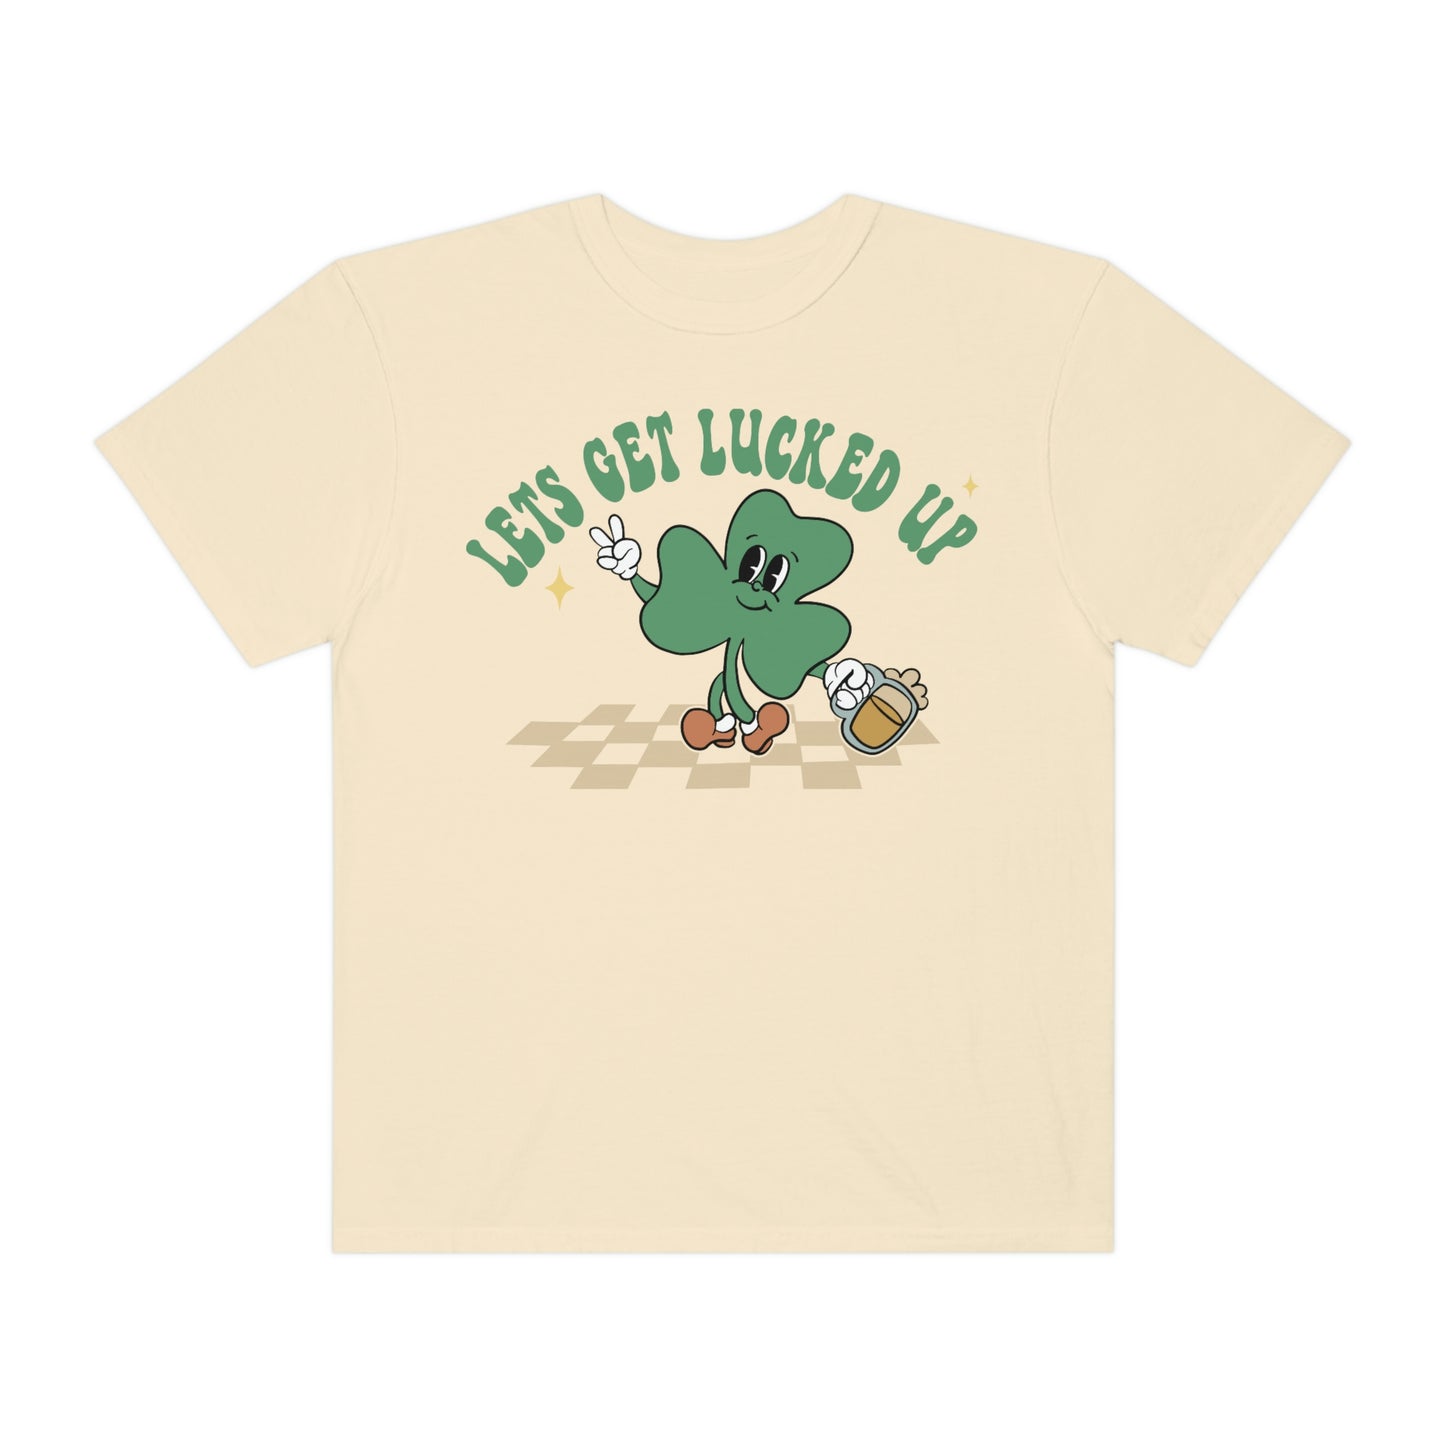 Lets Get Lucked Up - T-Shirt